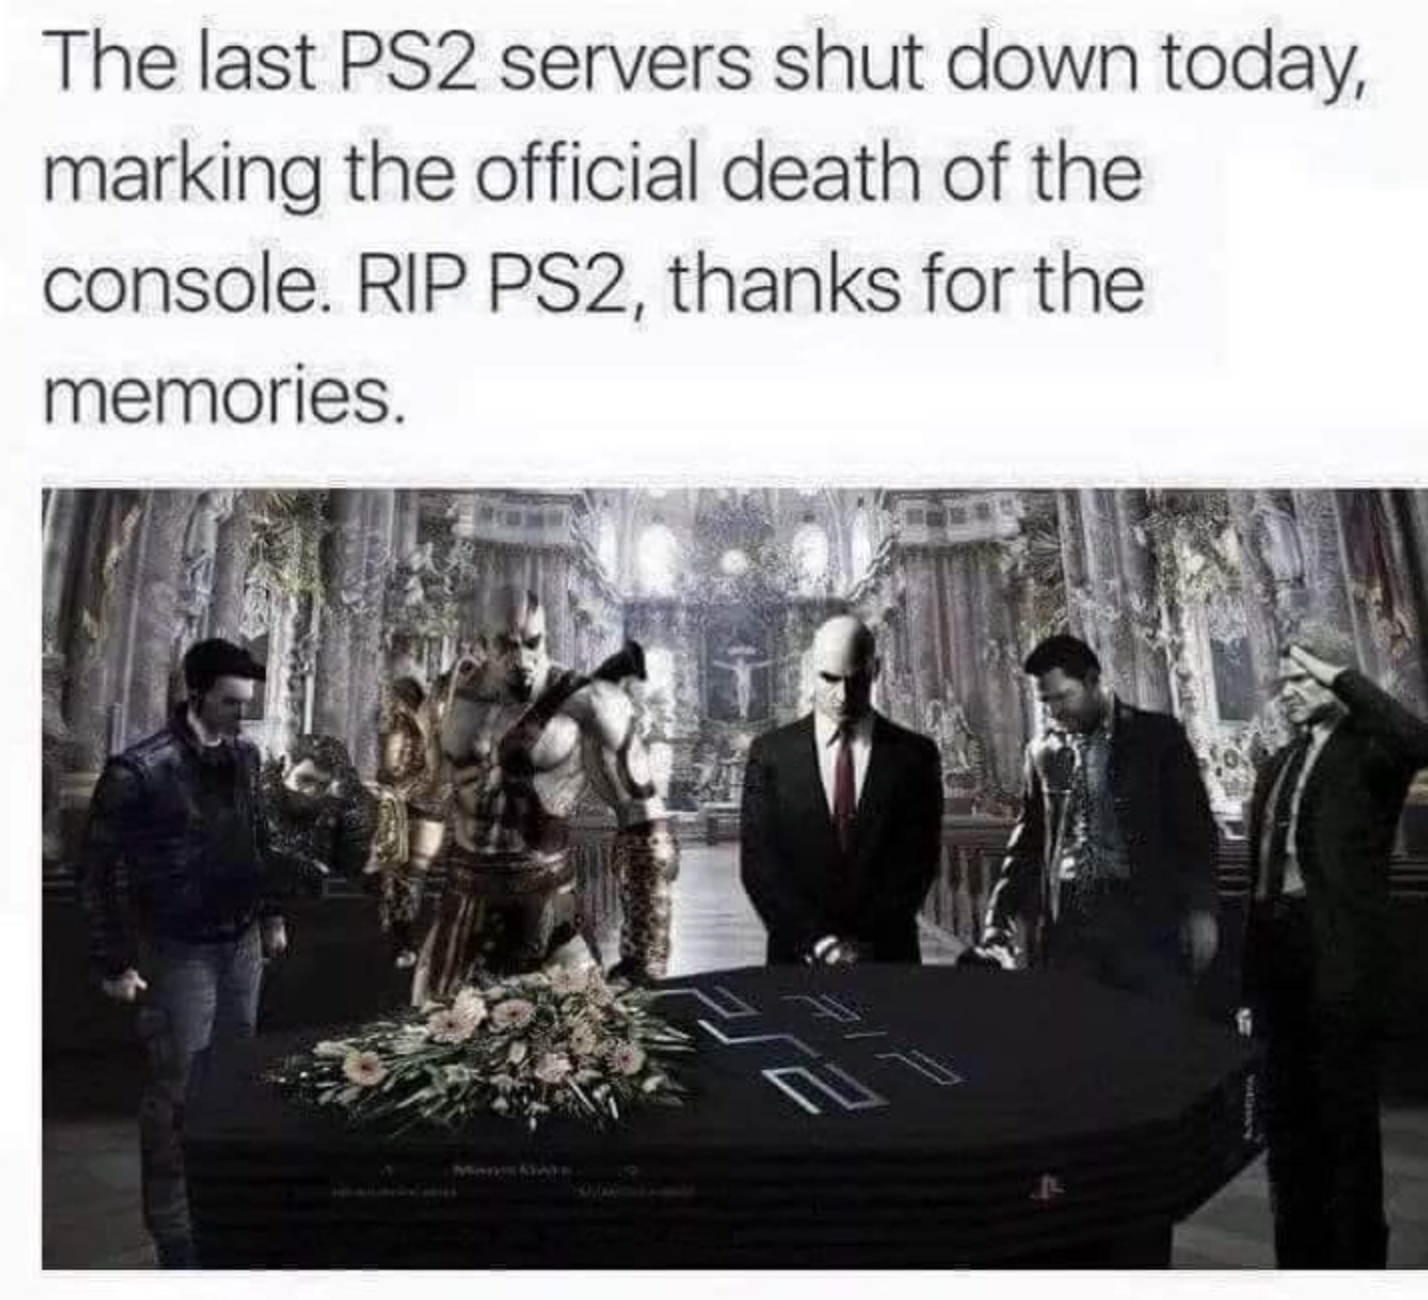 funny gaming memes - rip ps2 - The last PS2 servers shut down today, marking the official death of the console. Rip PS2, thanks for the memories.